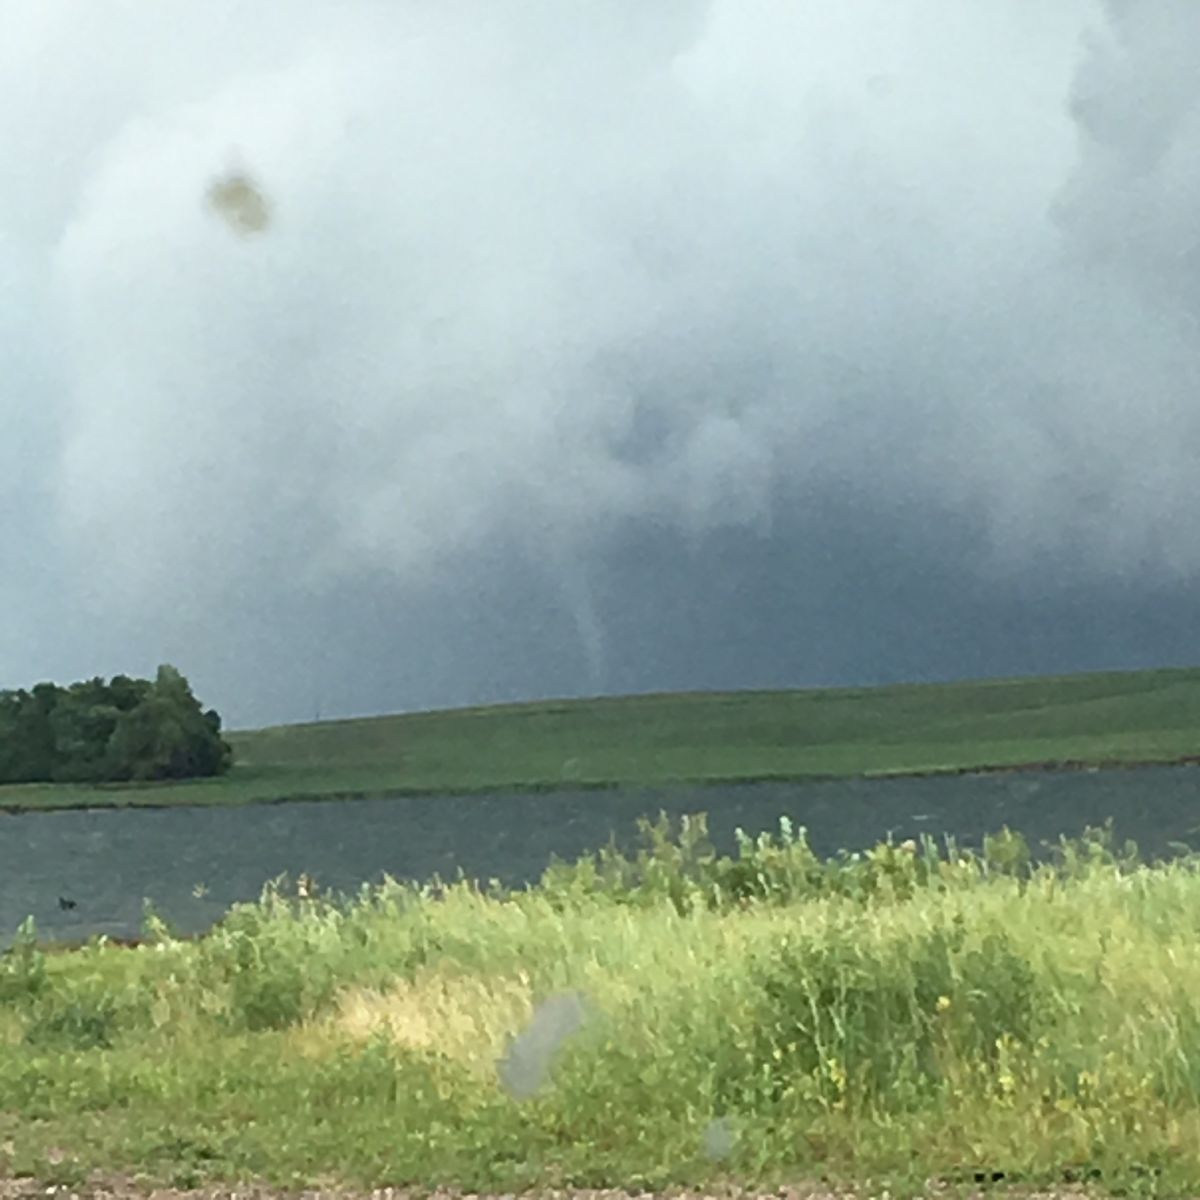 Photo taken on Highway 12 west of Webster by Marie Johnson around 2:43 PM CDT (looking North-Northeast)